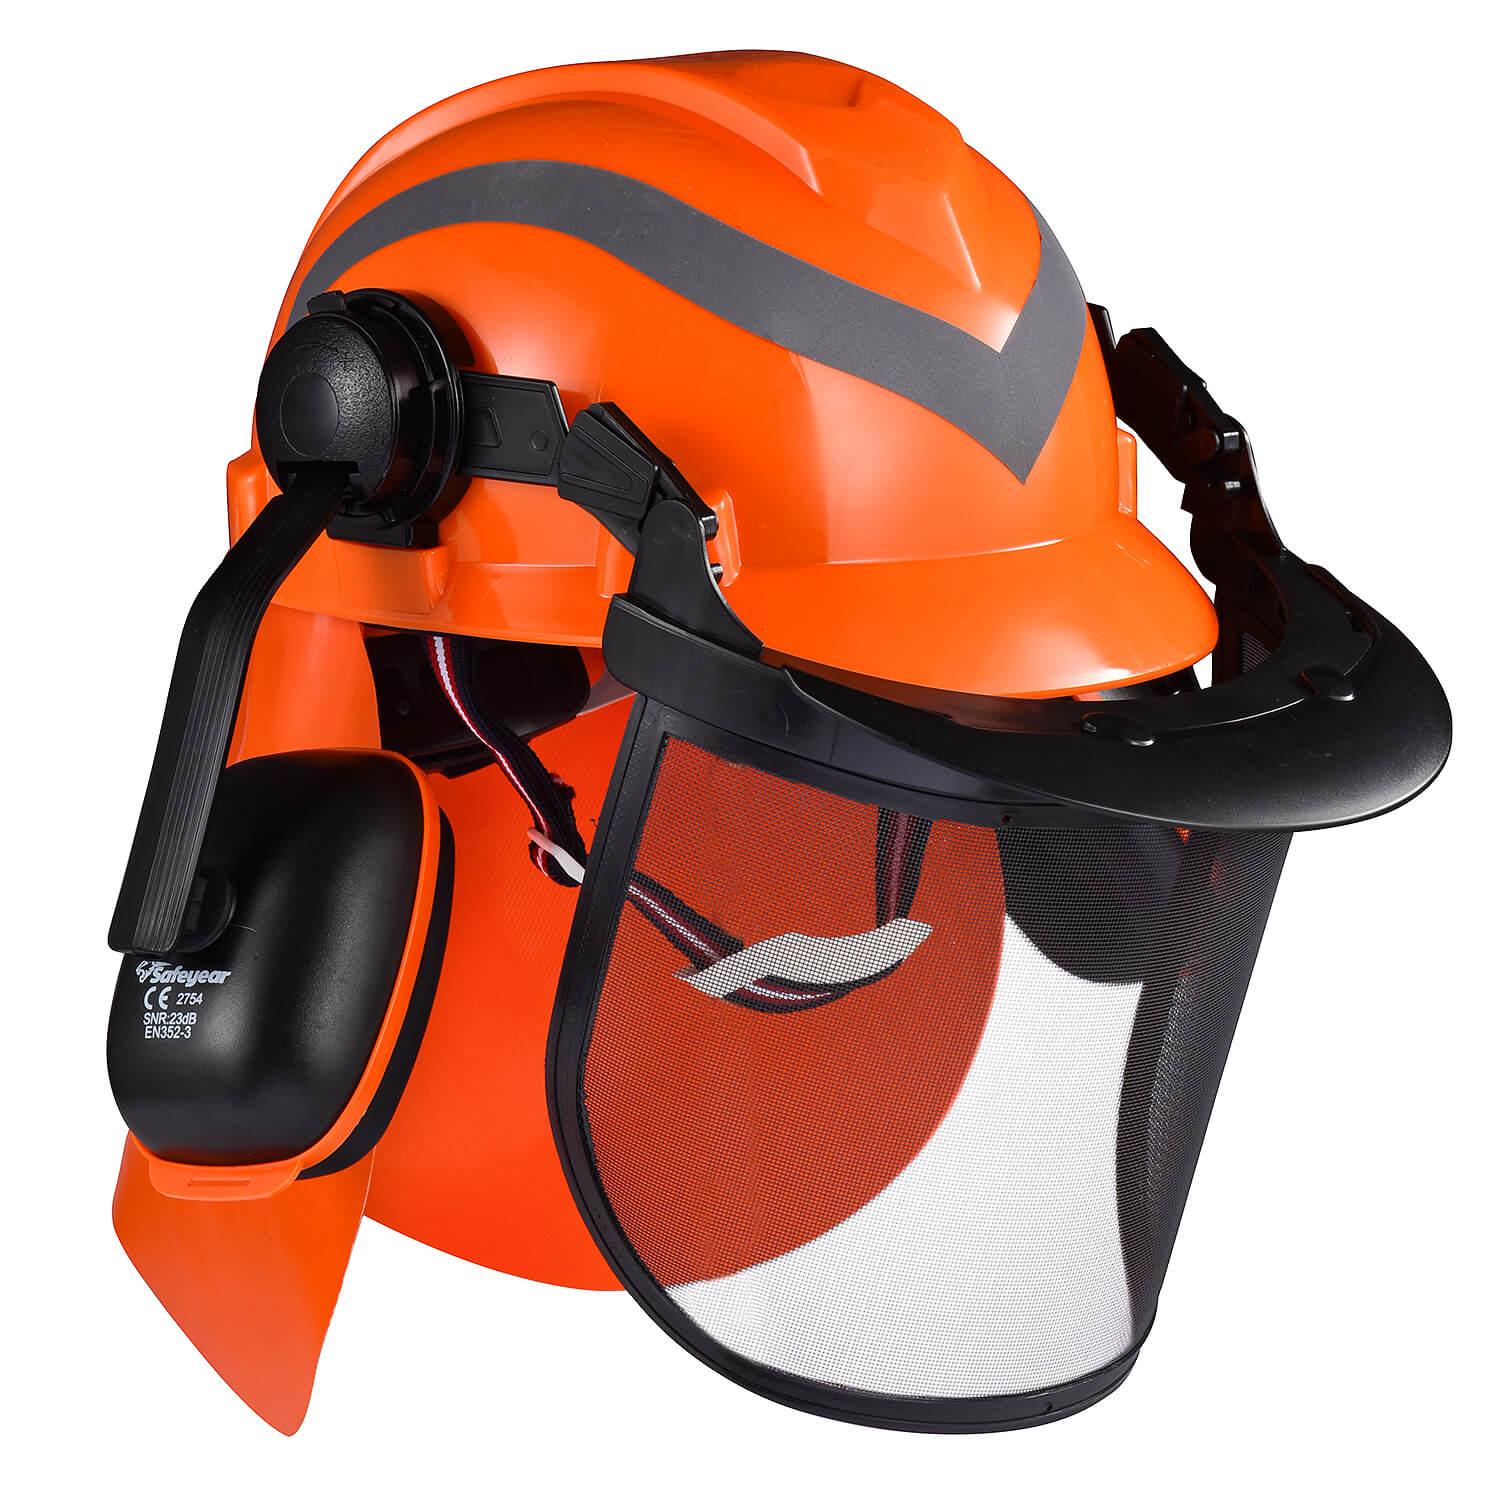 Safeyear Forestry Safety Helmet with 4 Point Ratchet Suspension with Adjustable Earmuffs & Face Shield Visor, Neck Shade